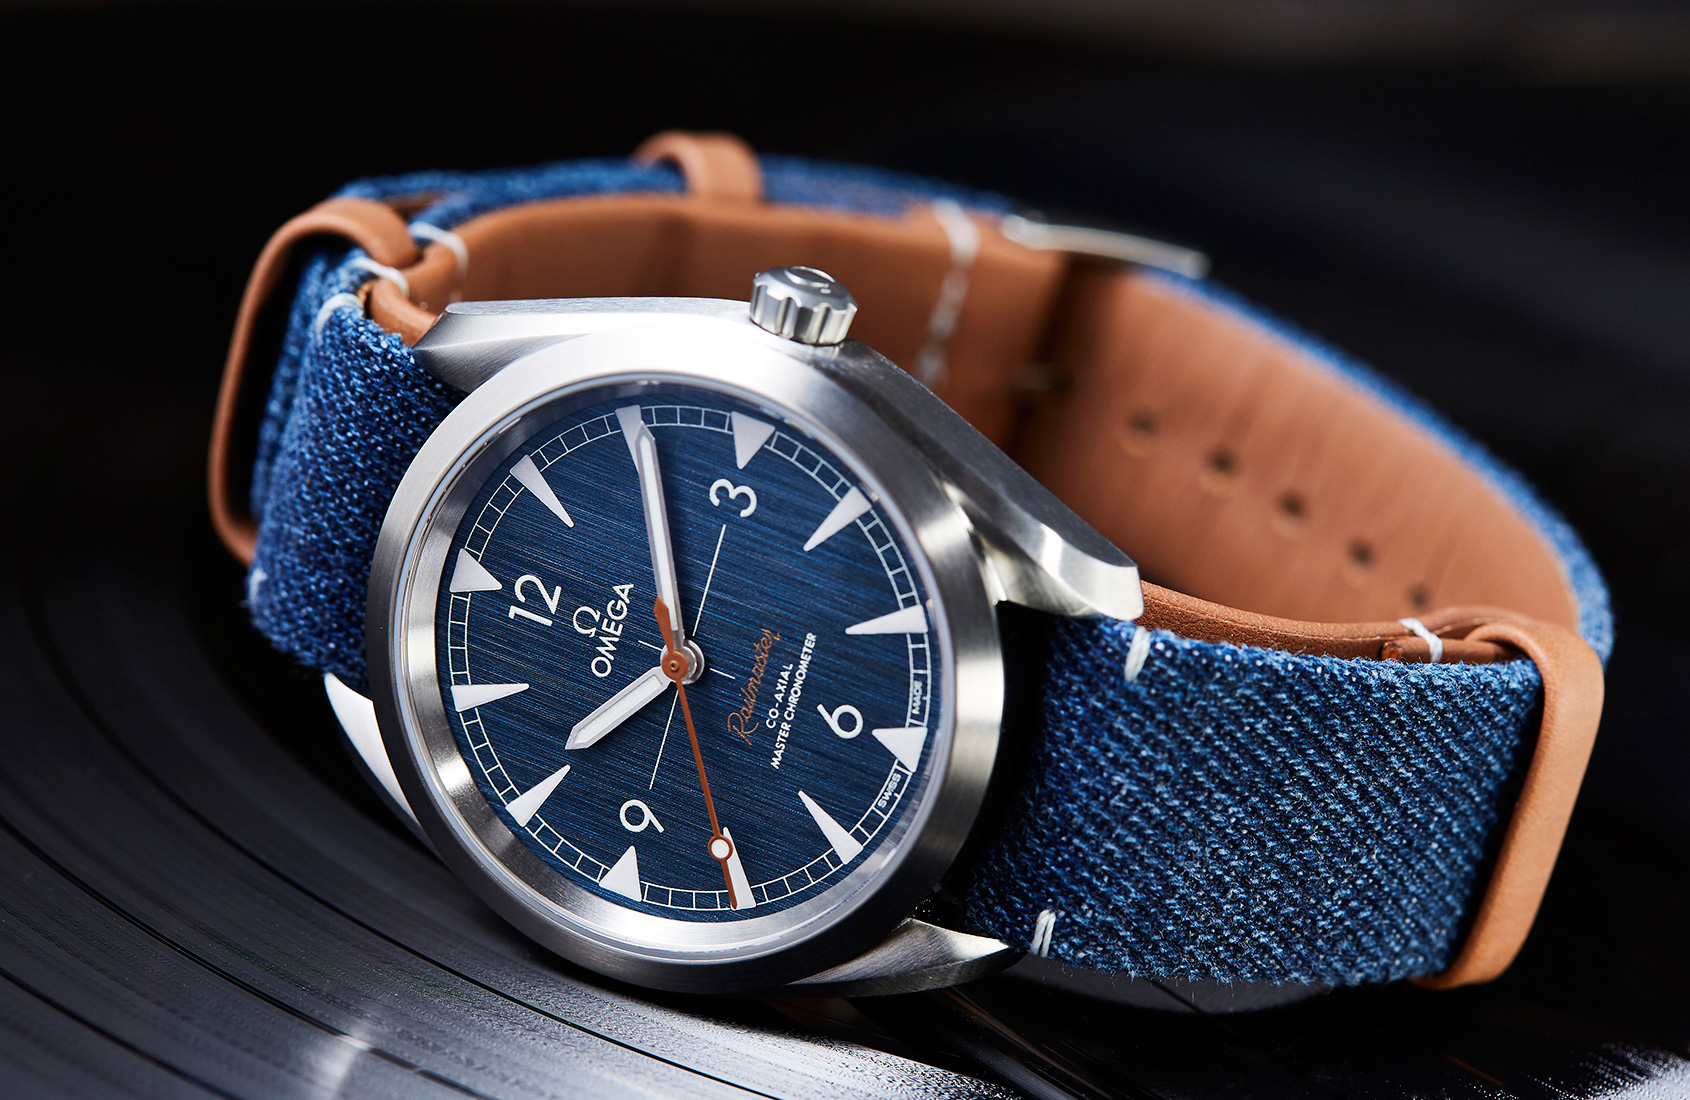 Is this double-denim Omega Seamaster 